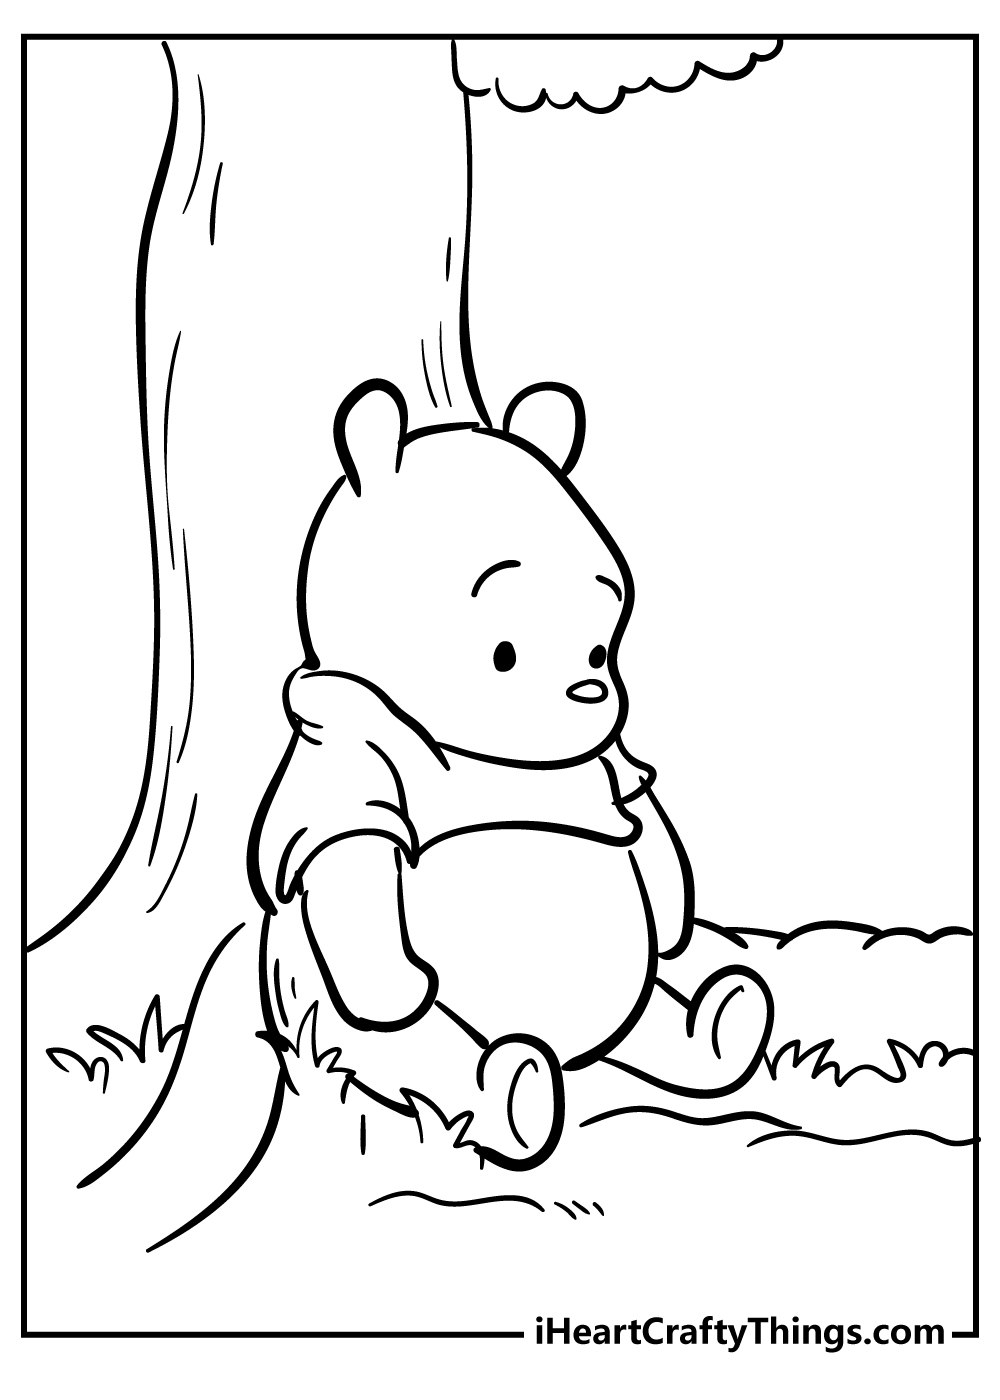 Winnie The Pooh Coloring Pages Updated 14